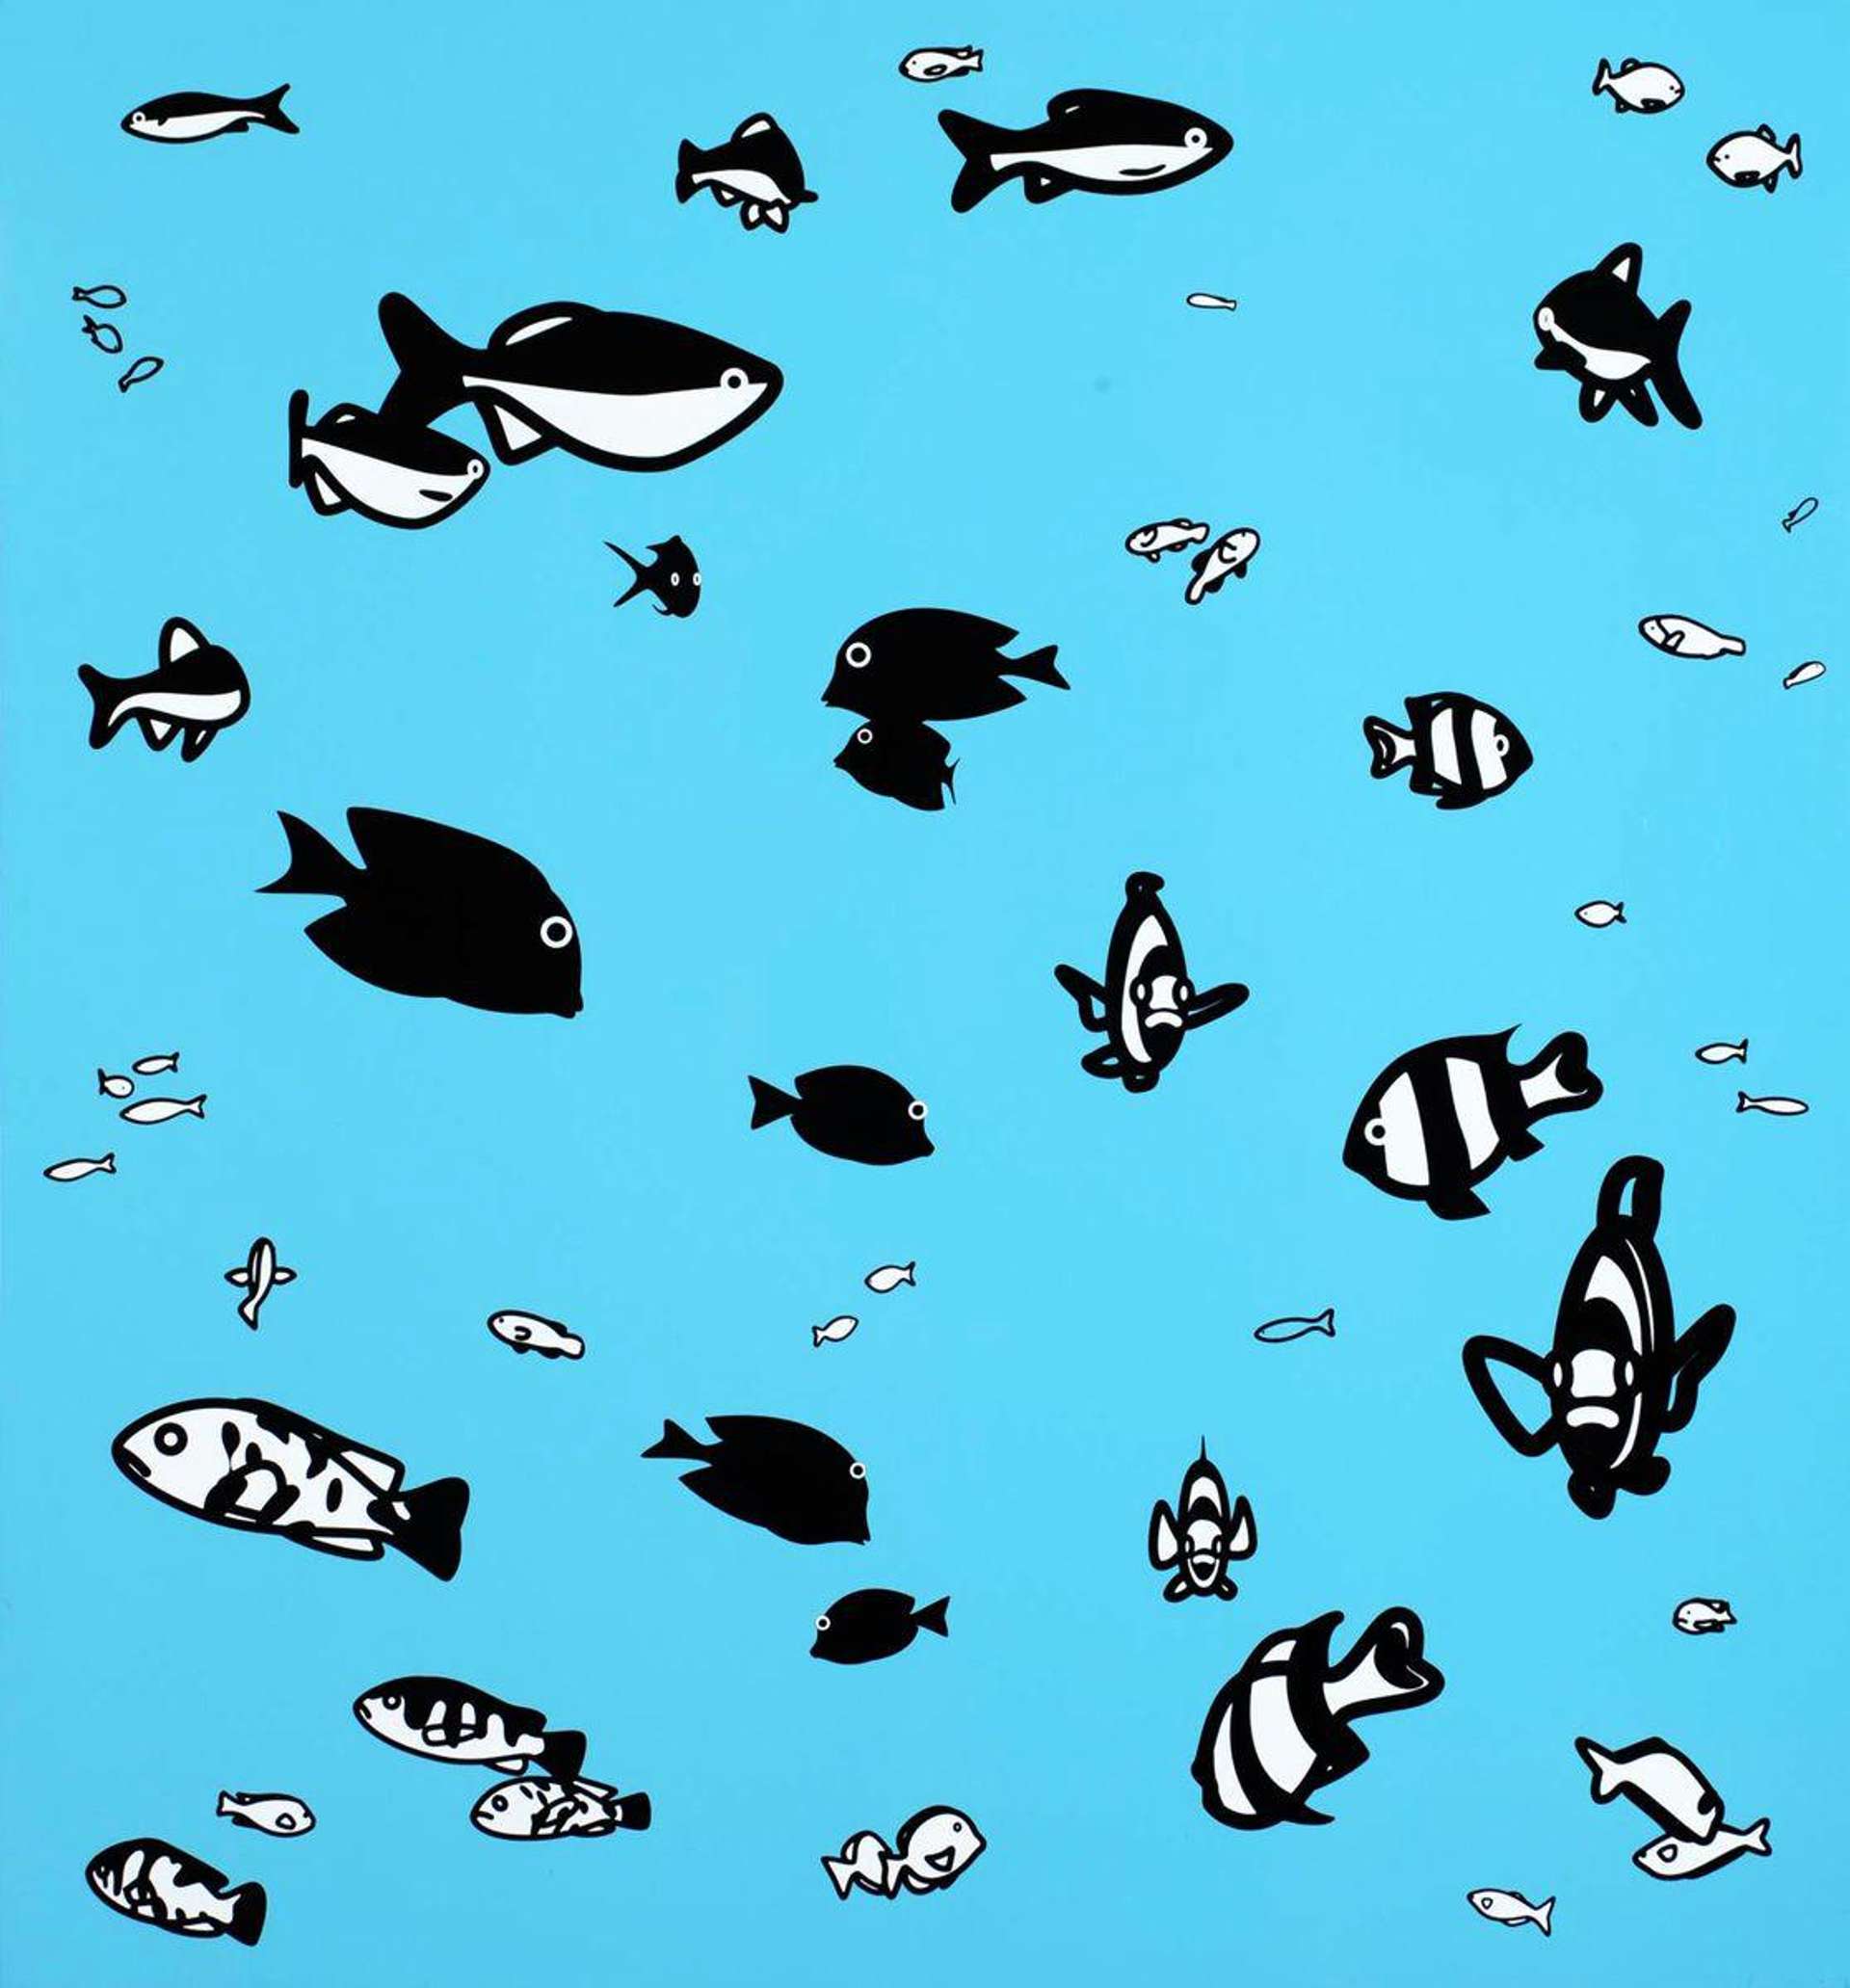 Julian Opie: We Swam Amongst The Fishes 5 - Signed Print